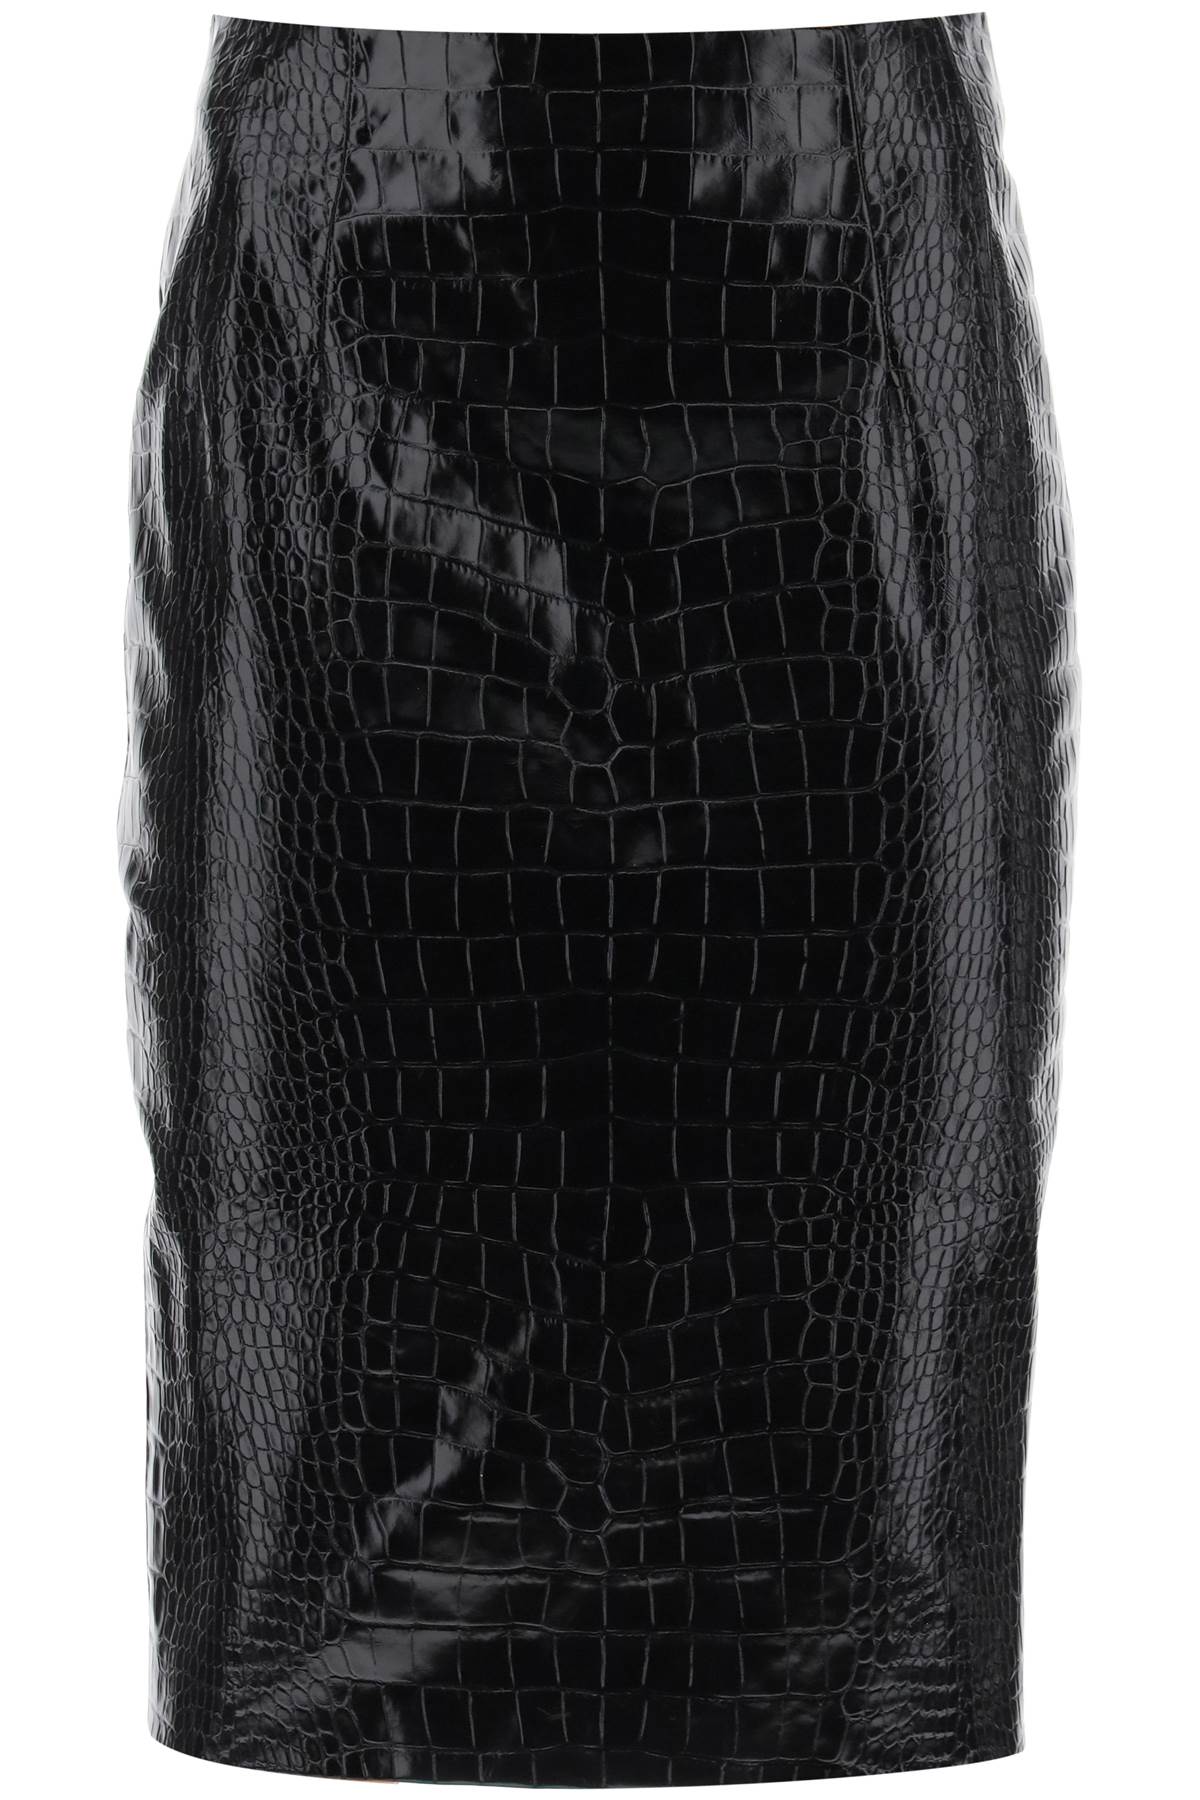 Versace croco-effect leather pencil skirt-0